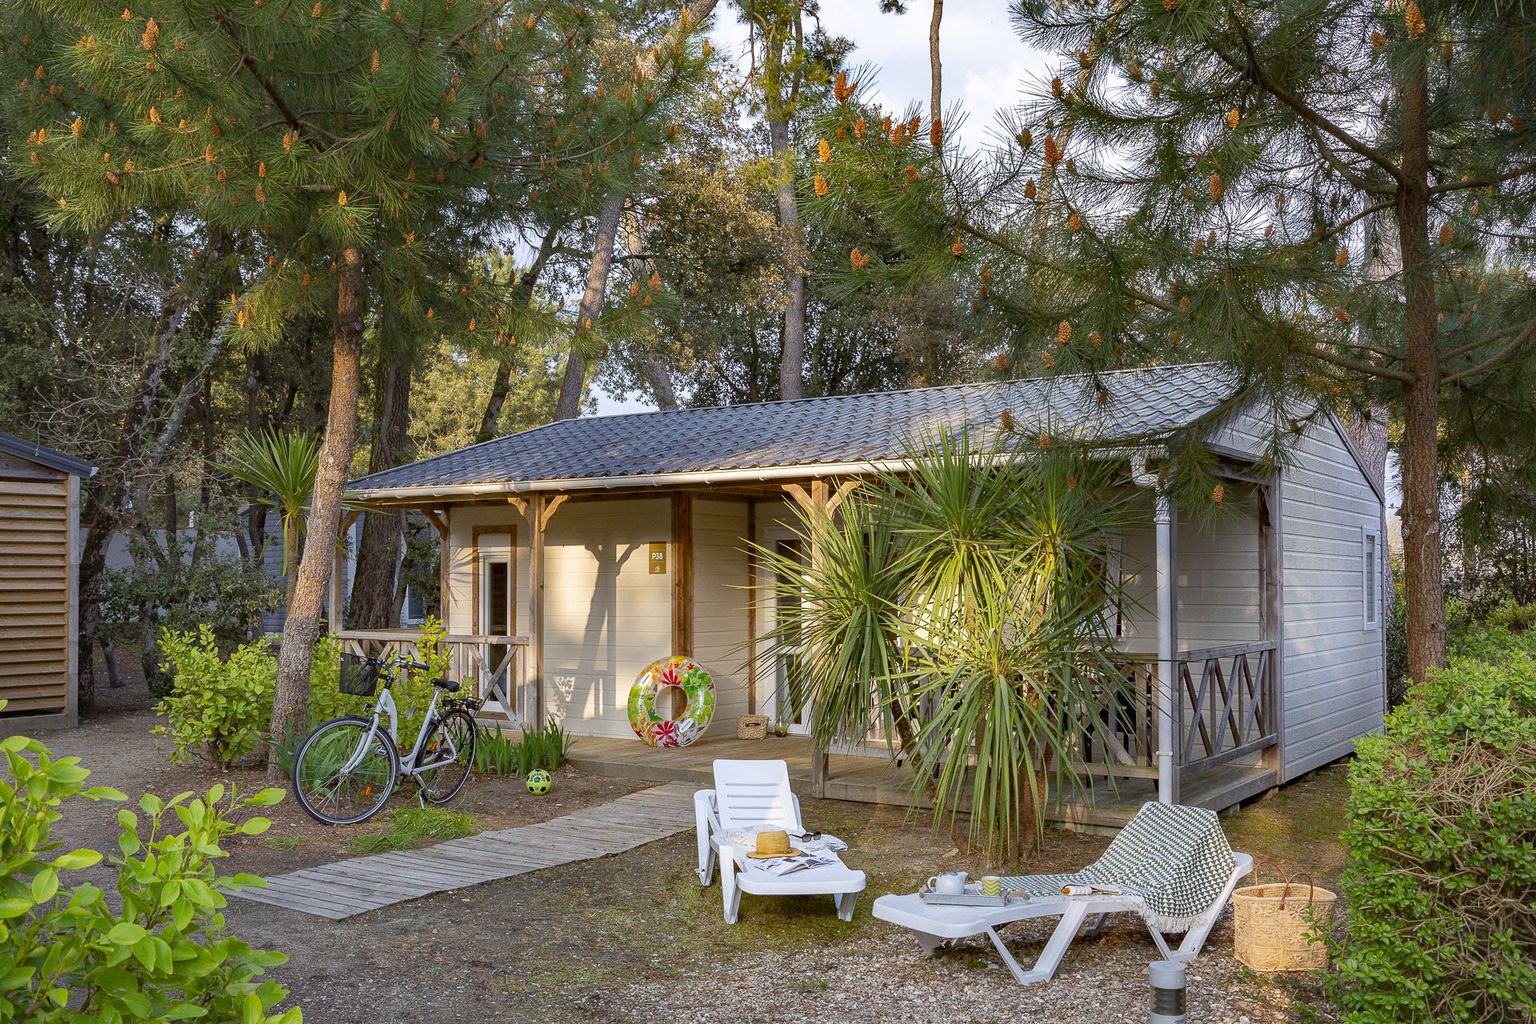 Accommodation - Chalet Les Pins**** 3 Bedrooms - Camping Sandaya Le Littoral